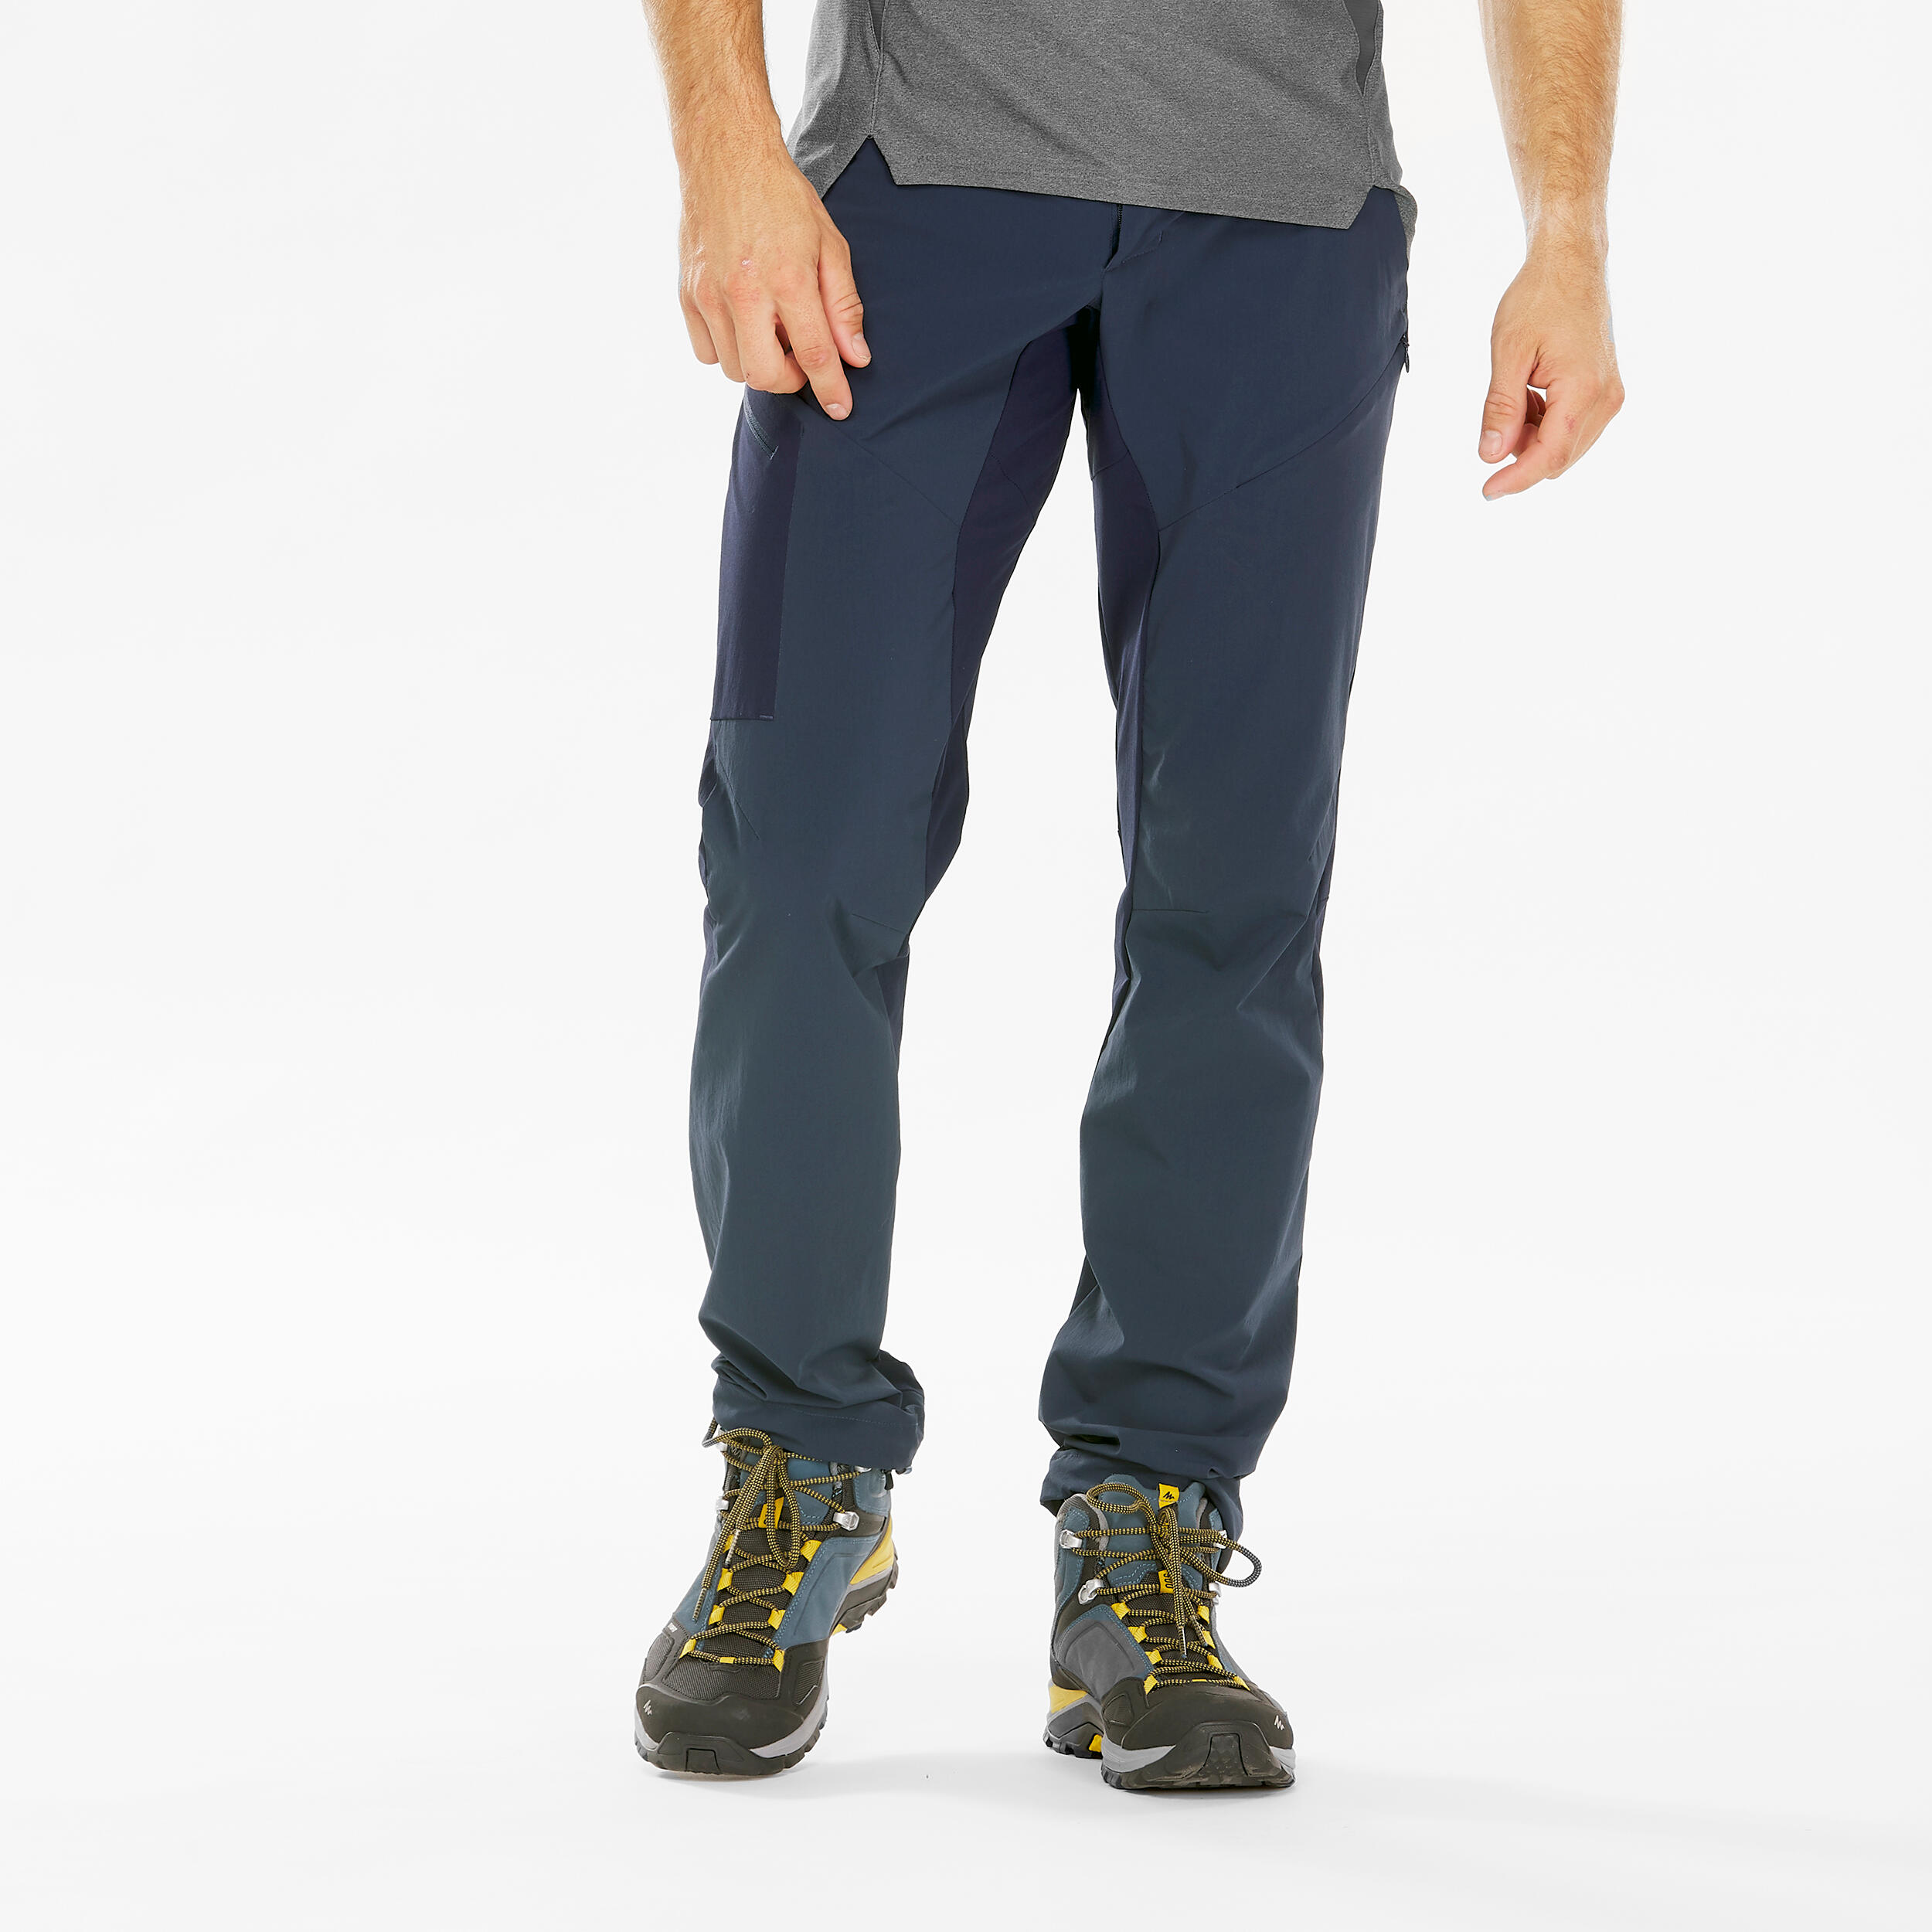 Buy Quechua NH500 Mens Nature Hiking Trousers  Blue W41 L32 Online at  Low Prices in India  Amazonin